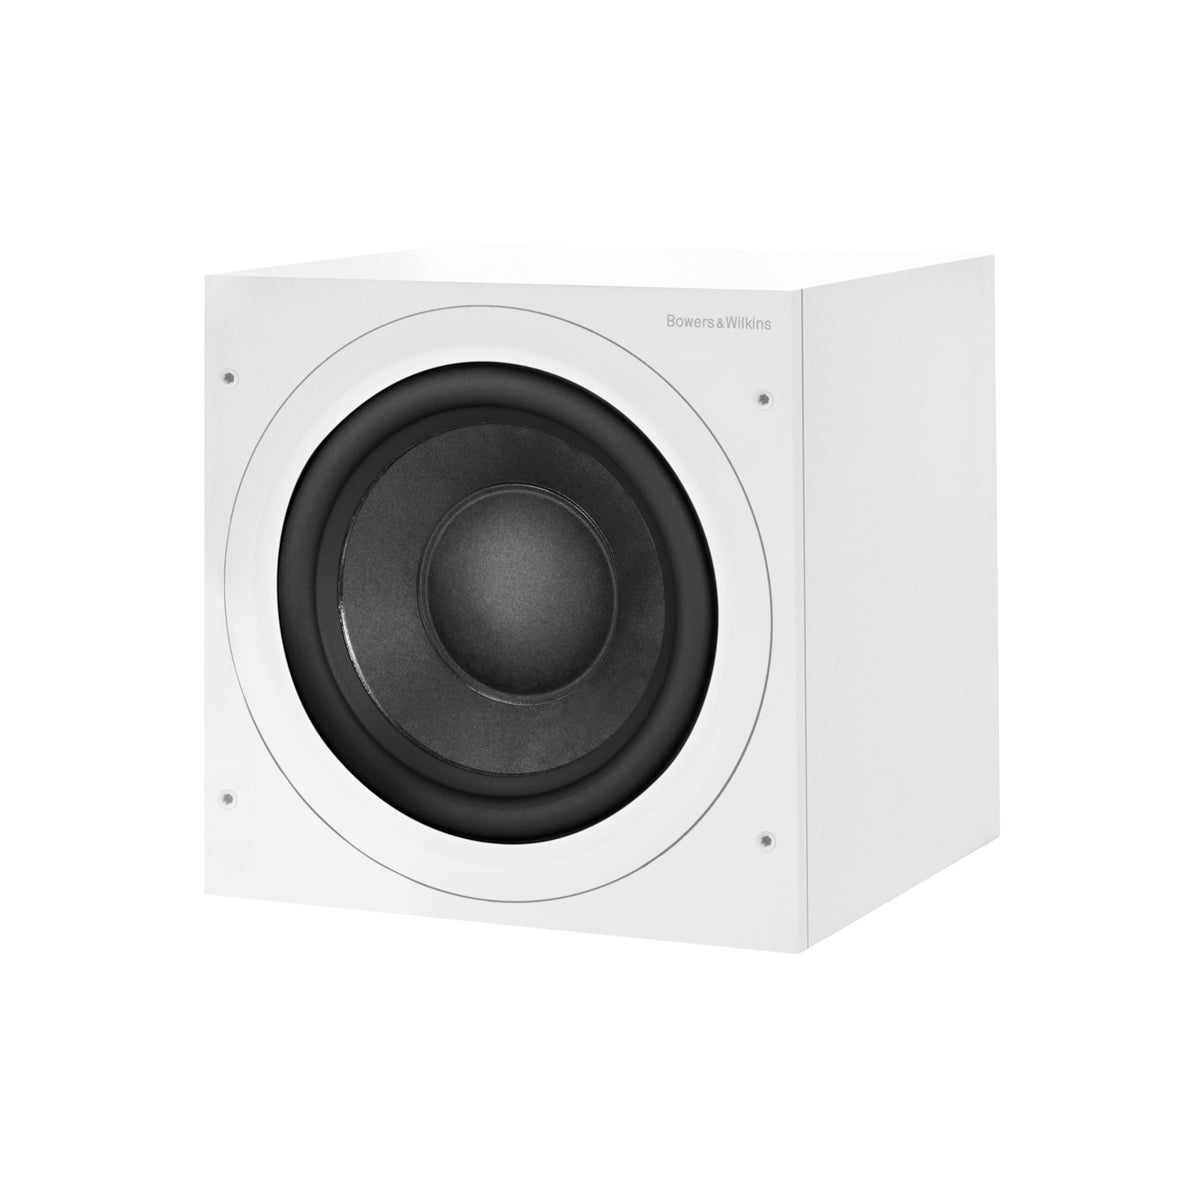 Bowers & Wilkins ASW608 8" 200W Subwoofer - Matt White - The Audio Experts